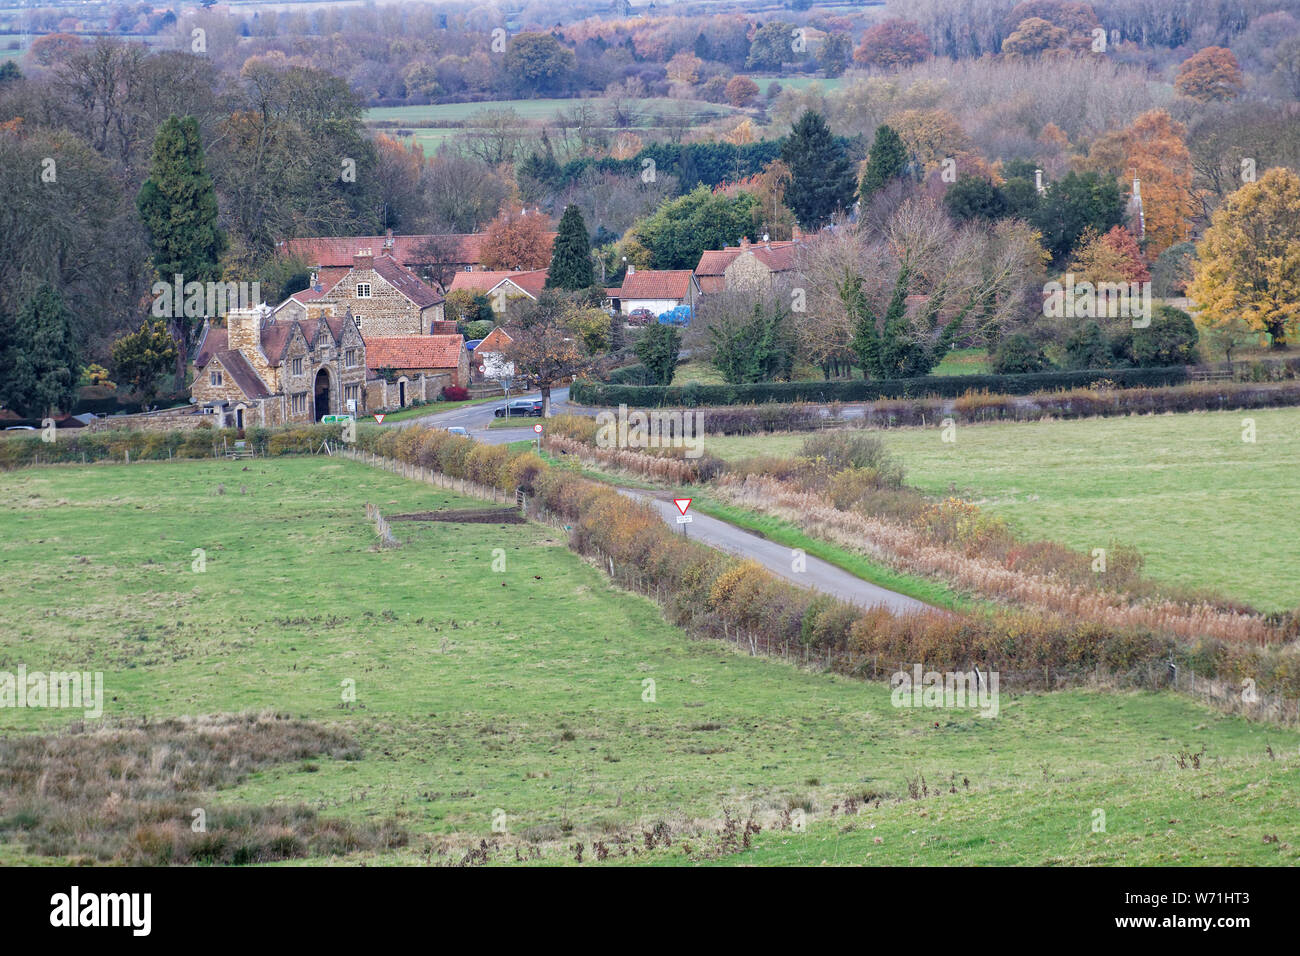 The landscape around the village of Denton in the Lincolnshire countryside on an autumn day Stock Photo